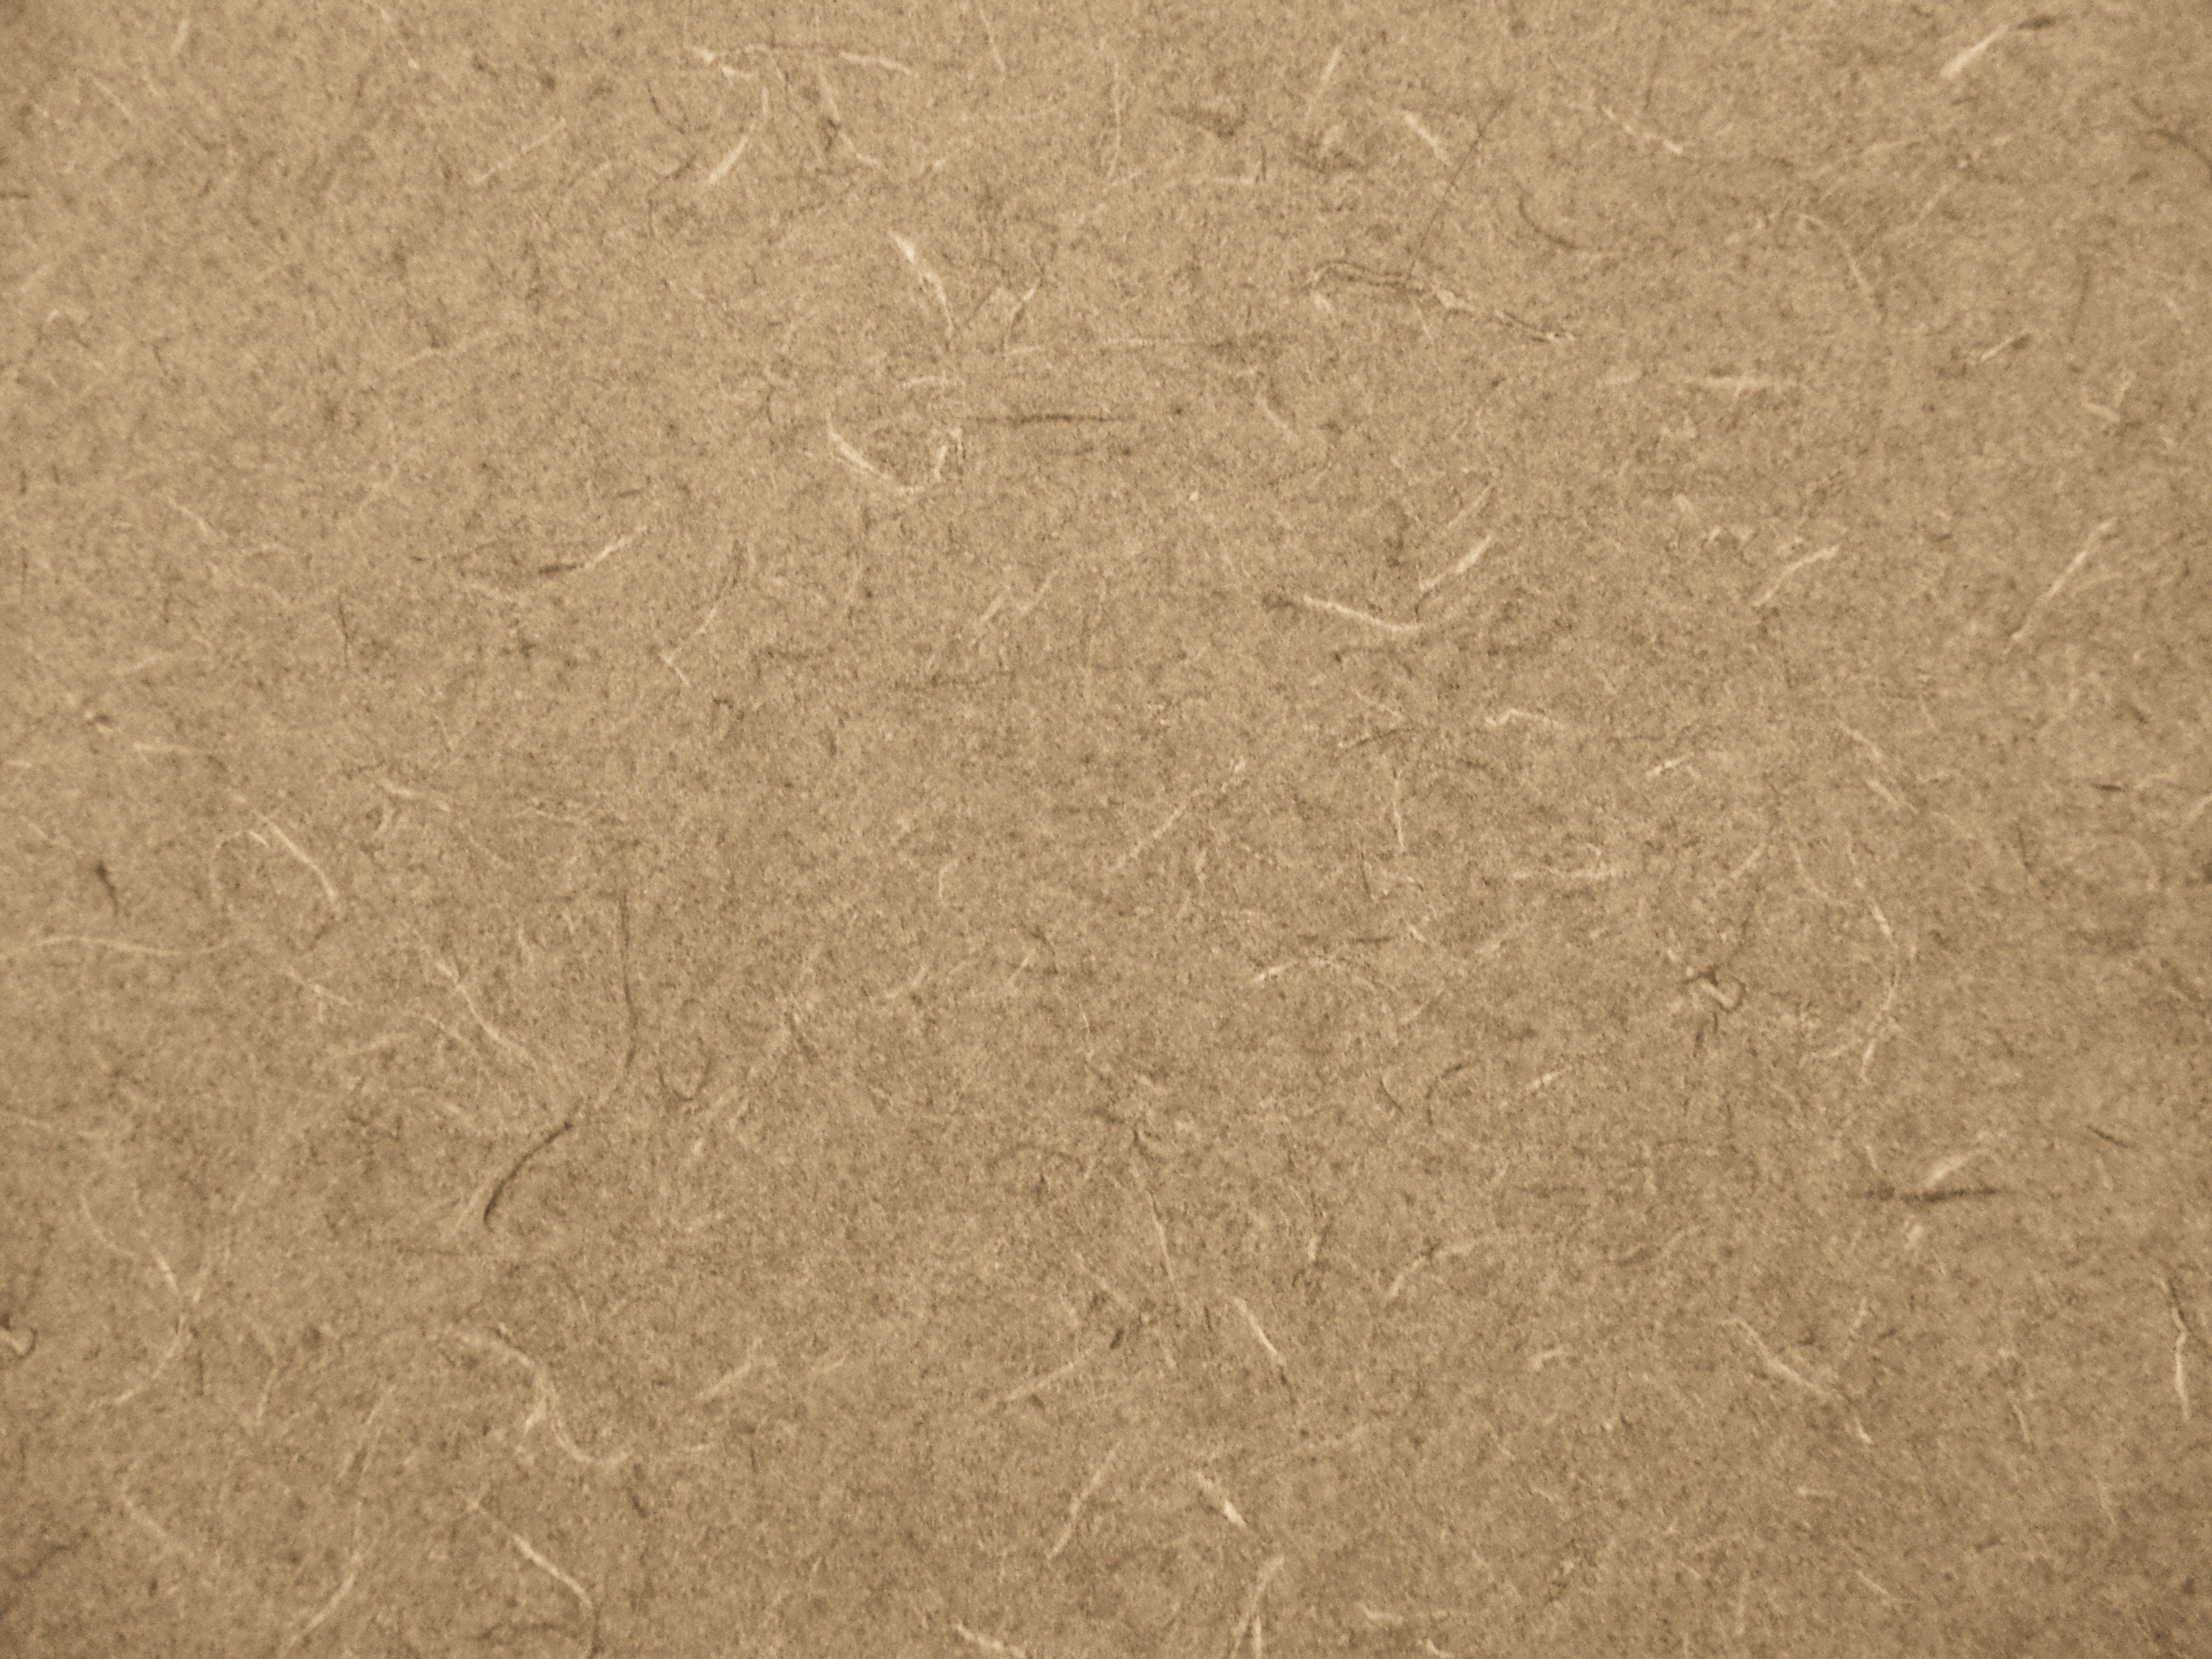 Tan Abstract Pattern Laminate Countertop Texture Picture